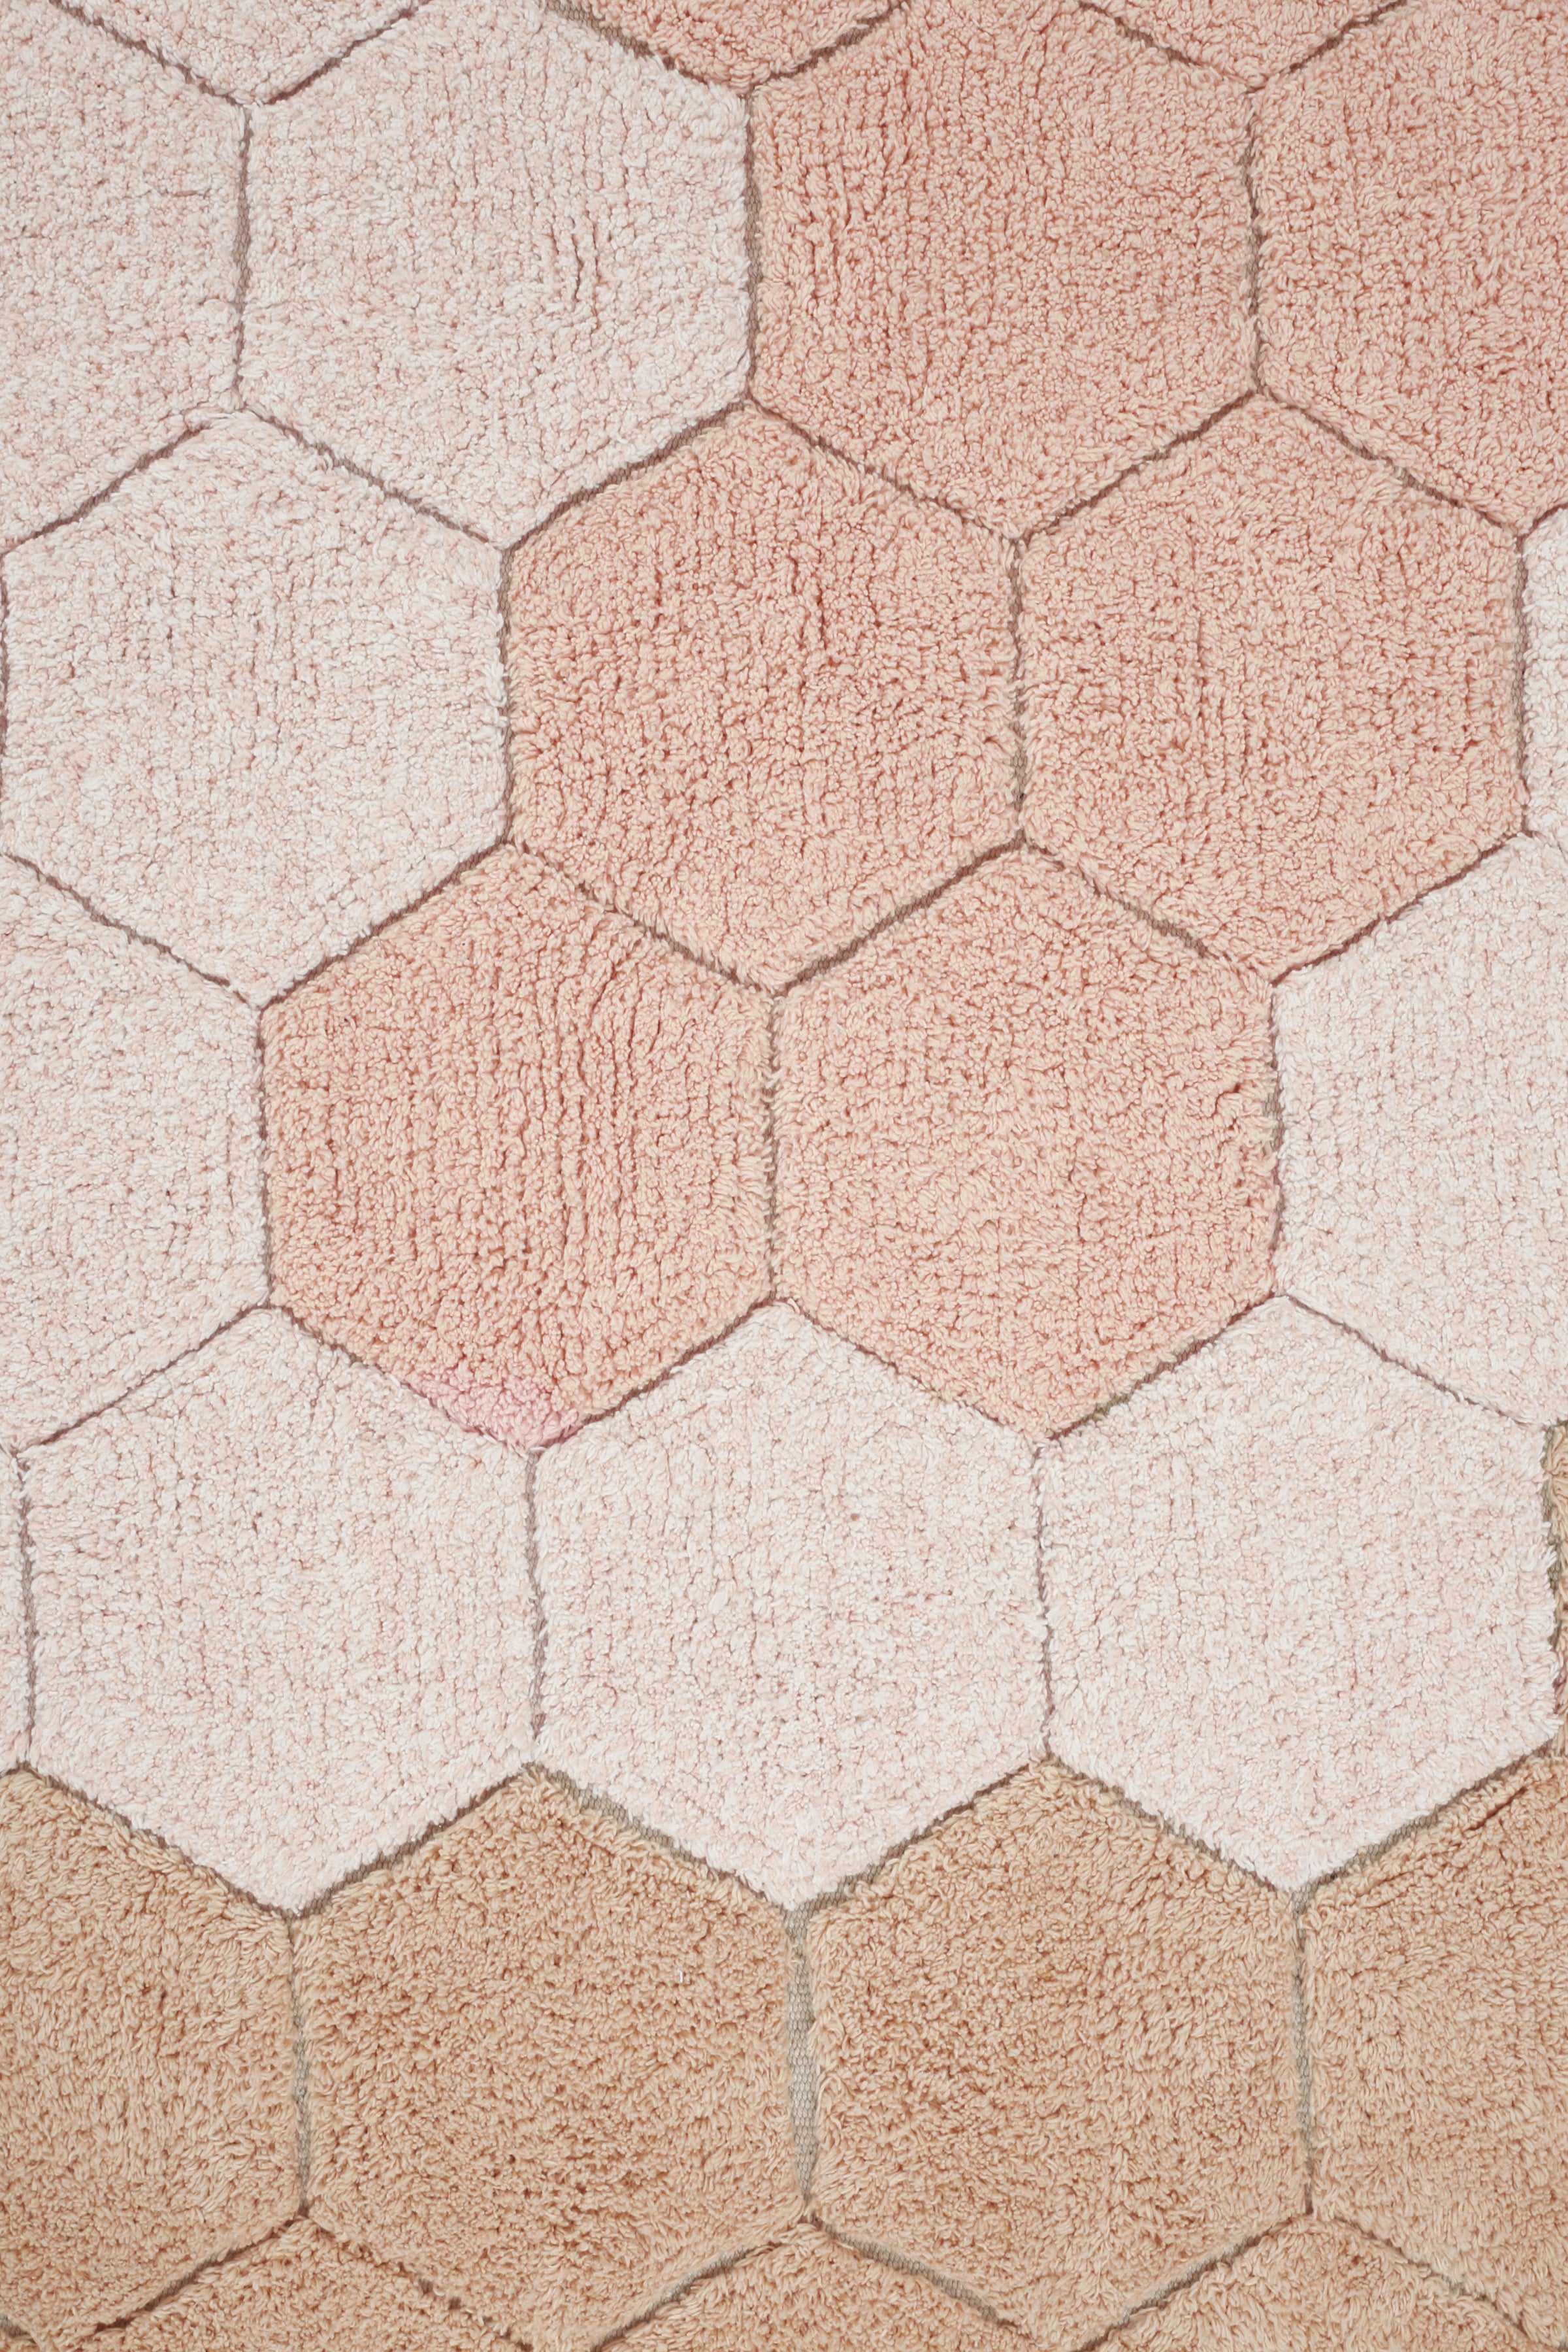 Round rose pink rug with honeycomb pattern